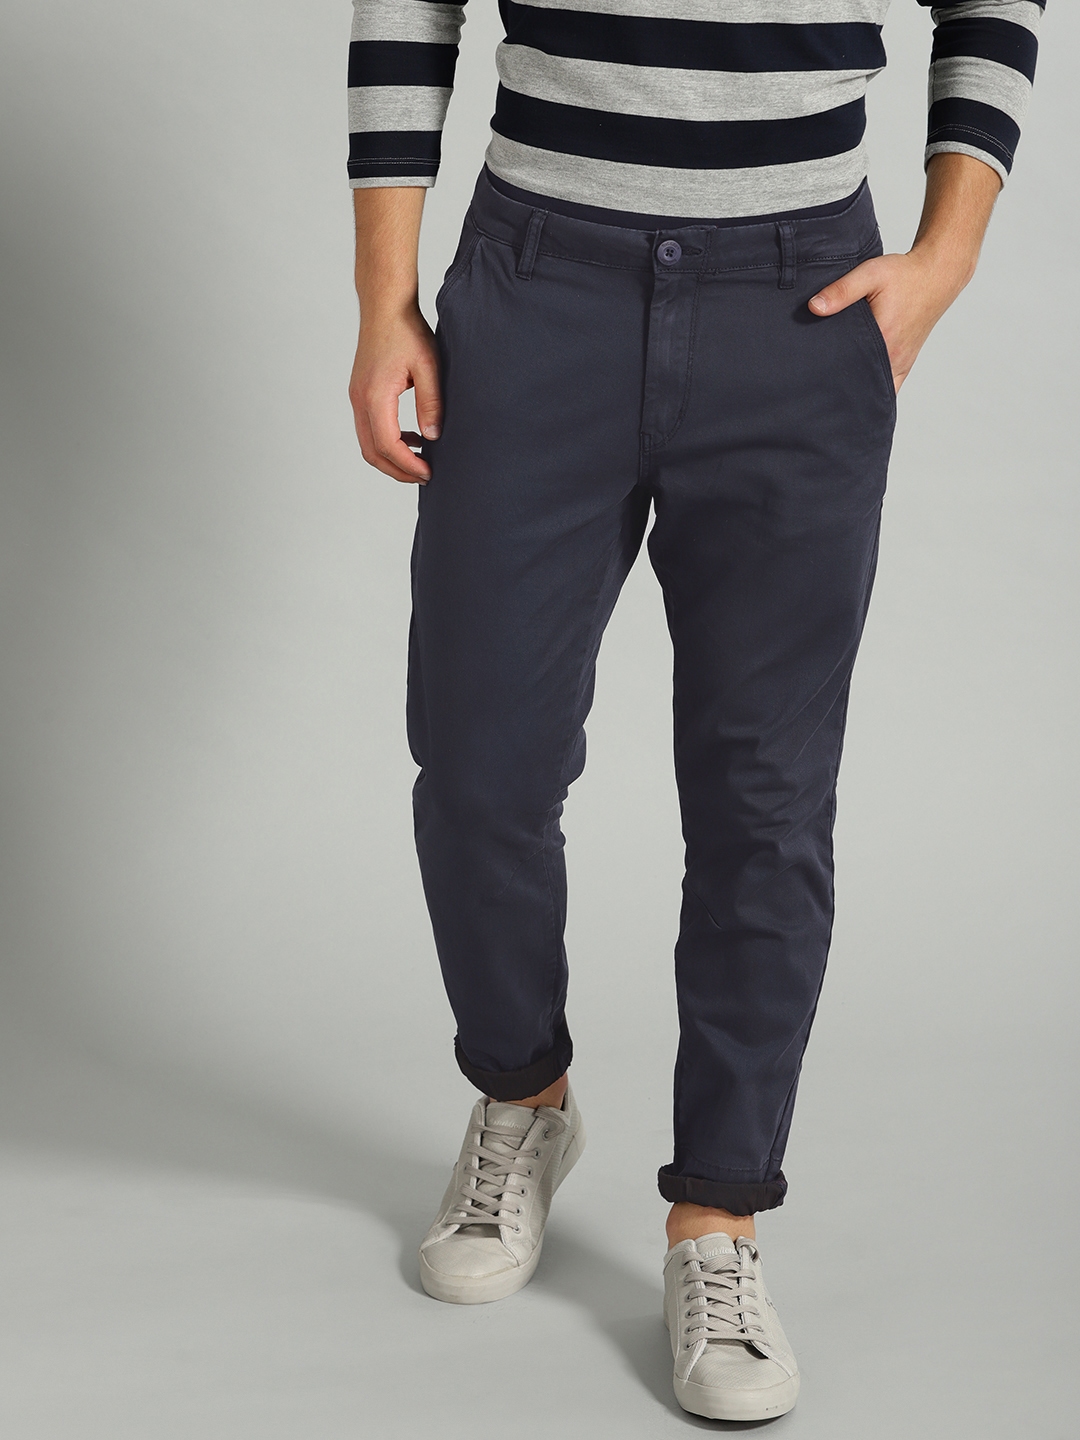 Buy The Roadster Lifestyle Co Men Navy Blue Regular Fit Solid Chinos ...